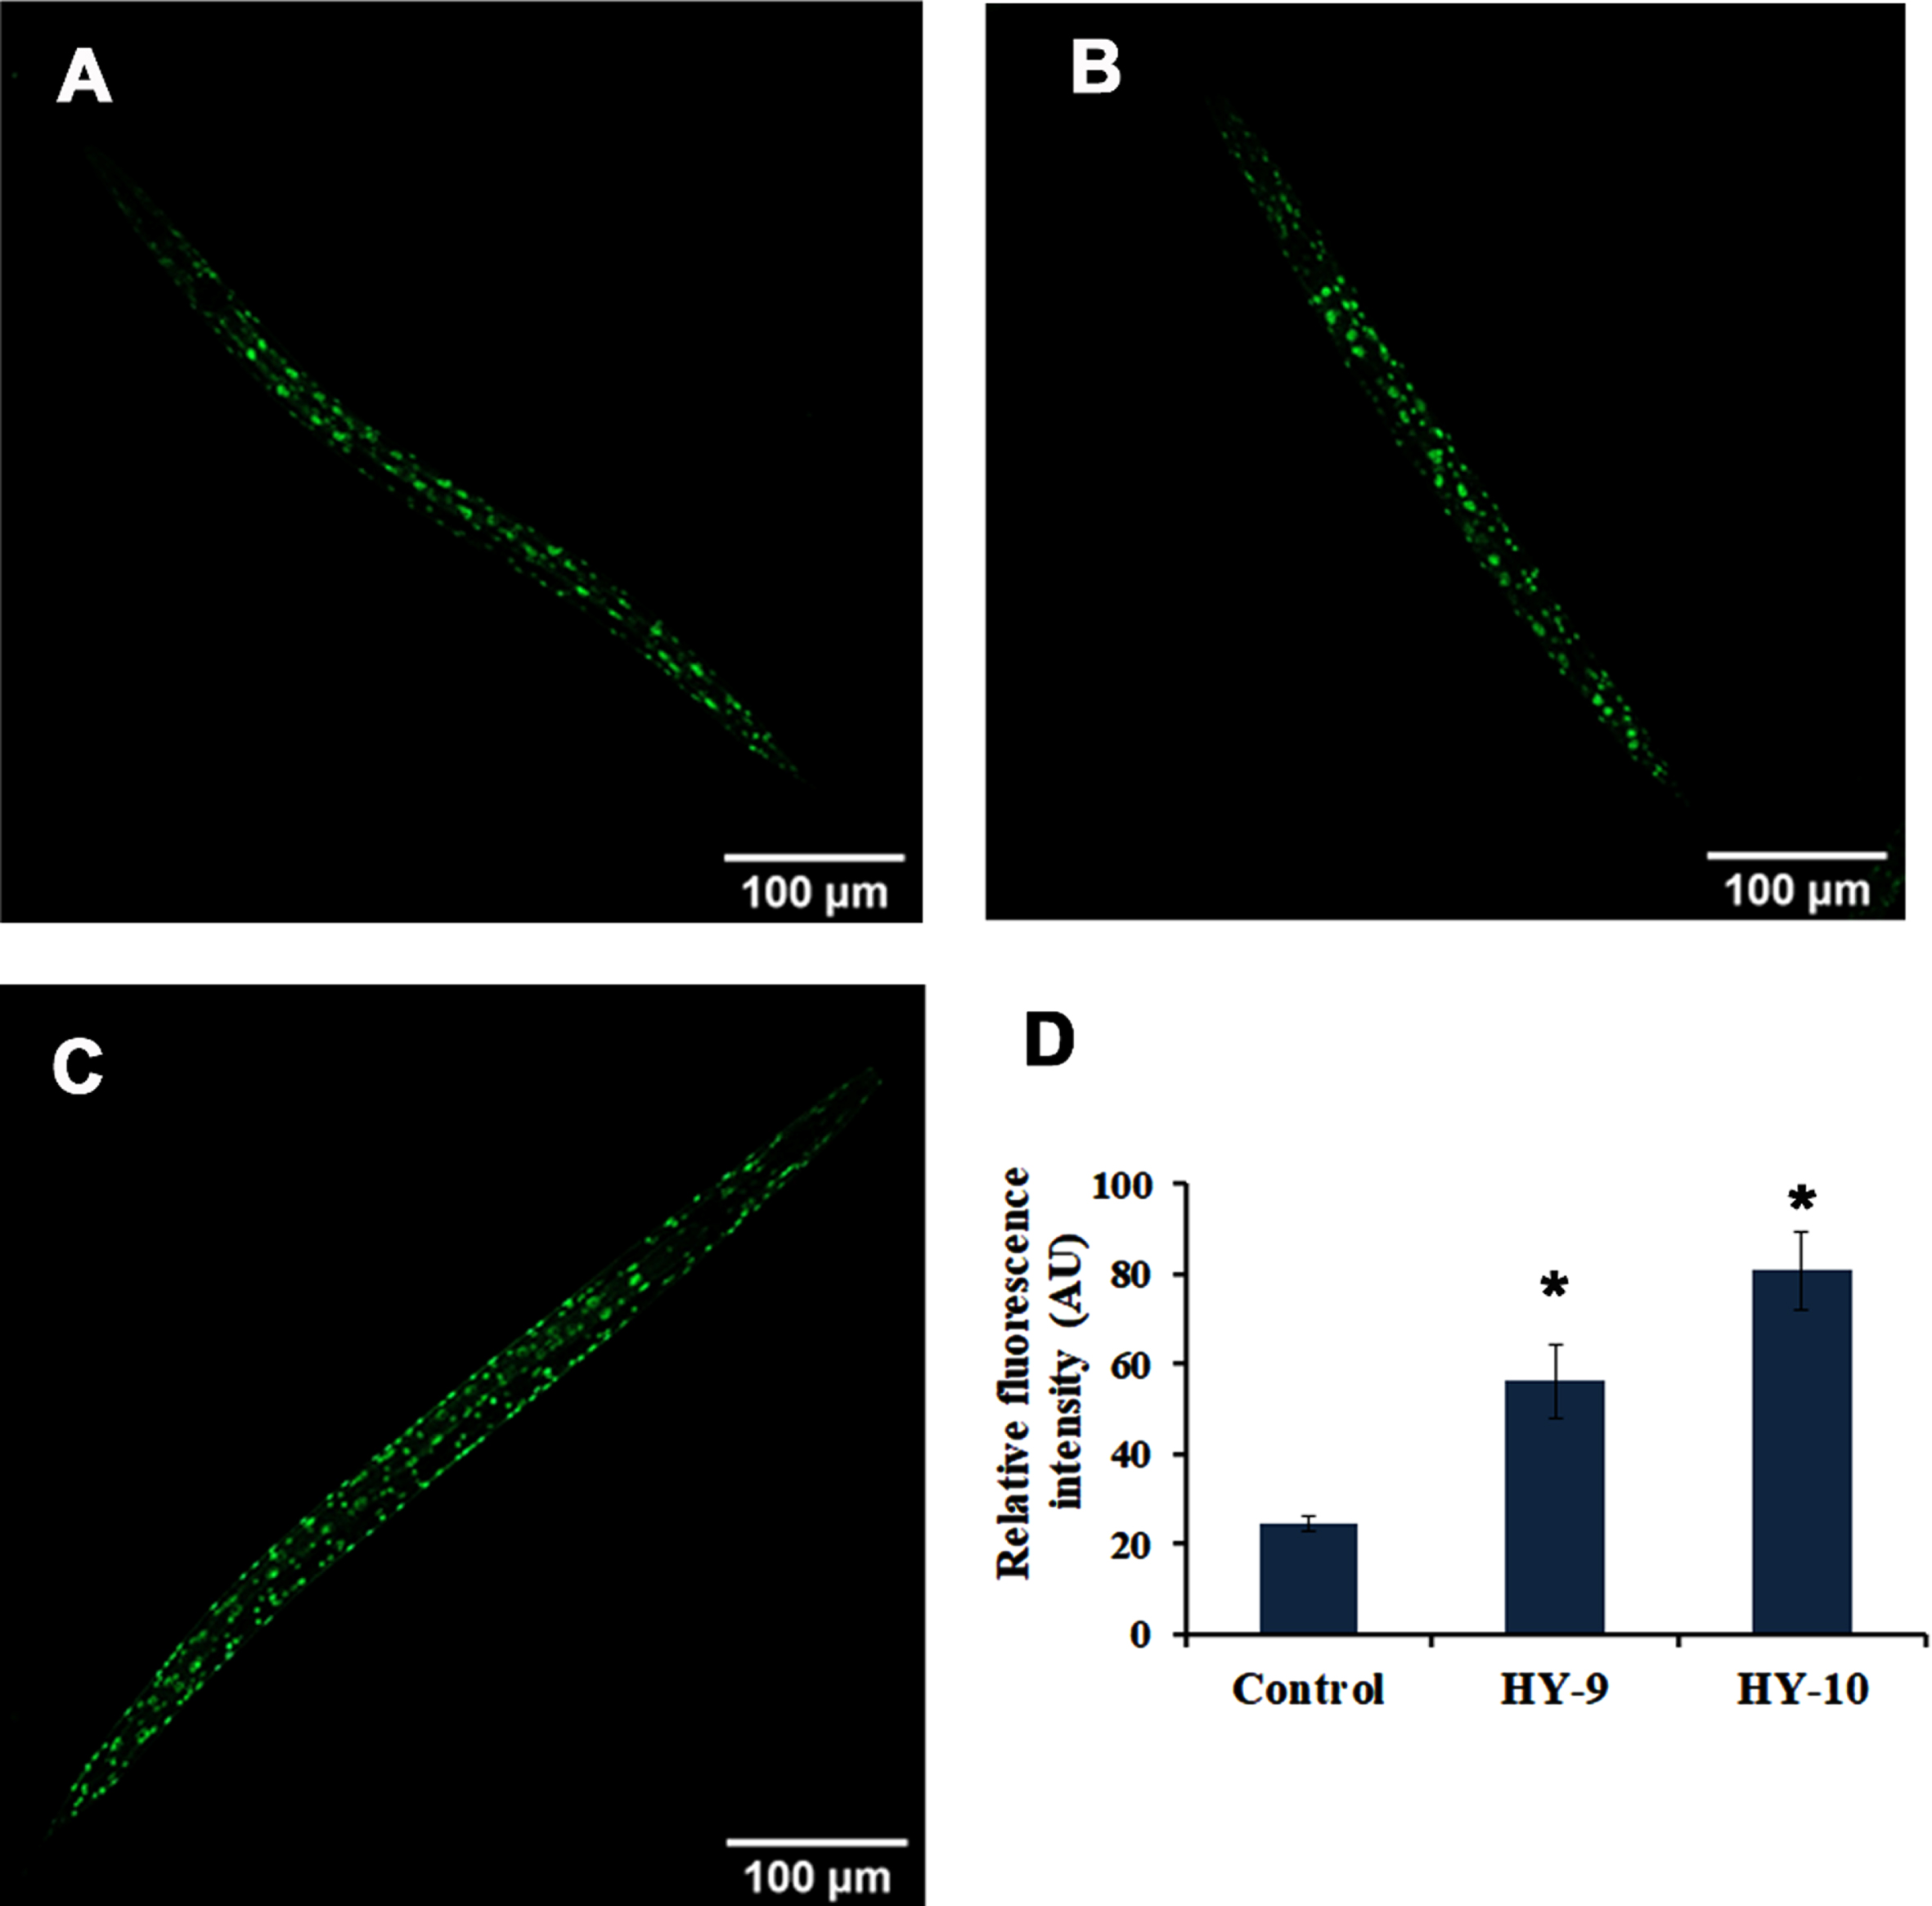 H. undatus extract can improve nuclear translocation of DAF-16 in C. elegans. (A) TJ356 Control (B-C) TJ356 treated with 9–10μg/ml of H. undatus extract. (E) Quantification of fluorescence indicates significant increase in expression of DAF-16 at concentrations 9 and 10μg/ml of H. undatus extract.